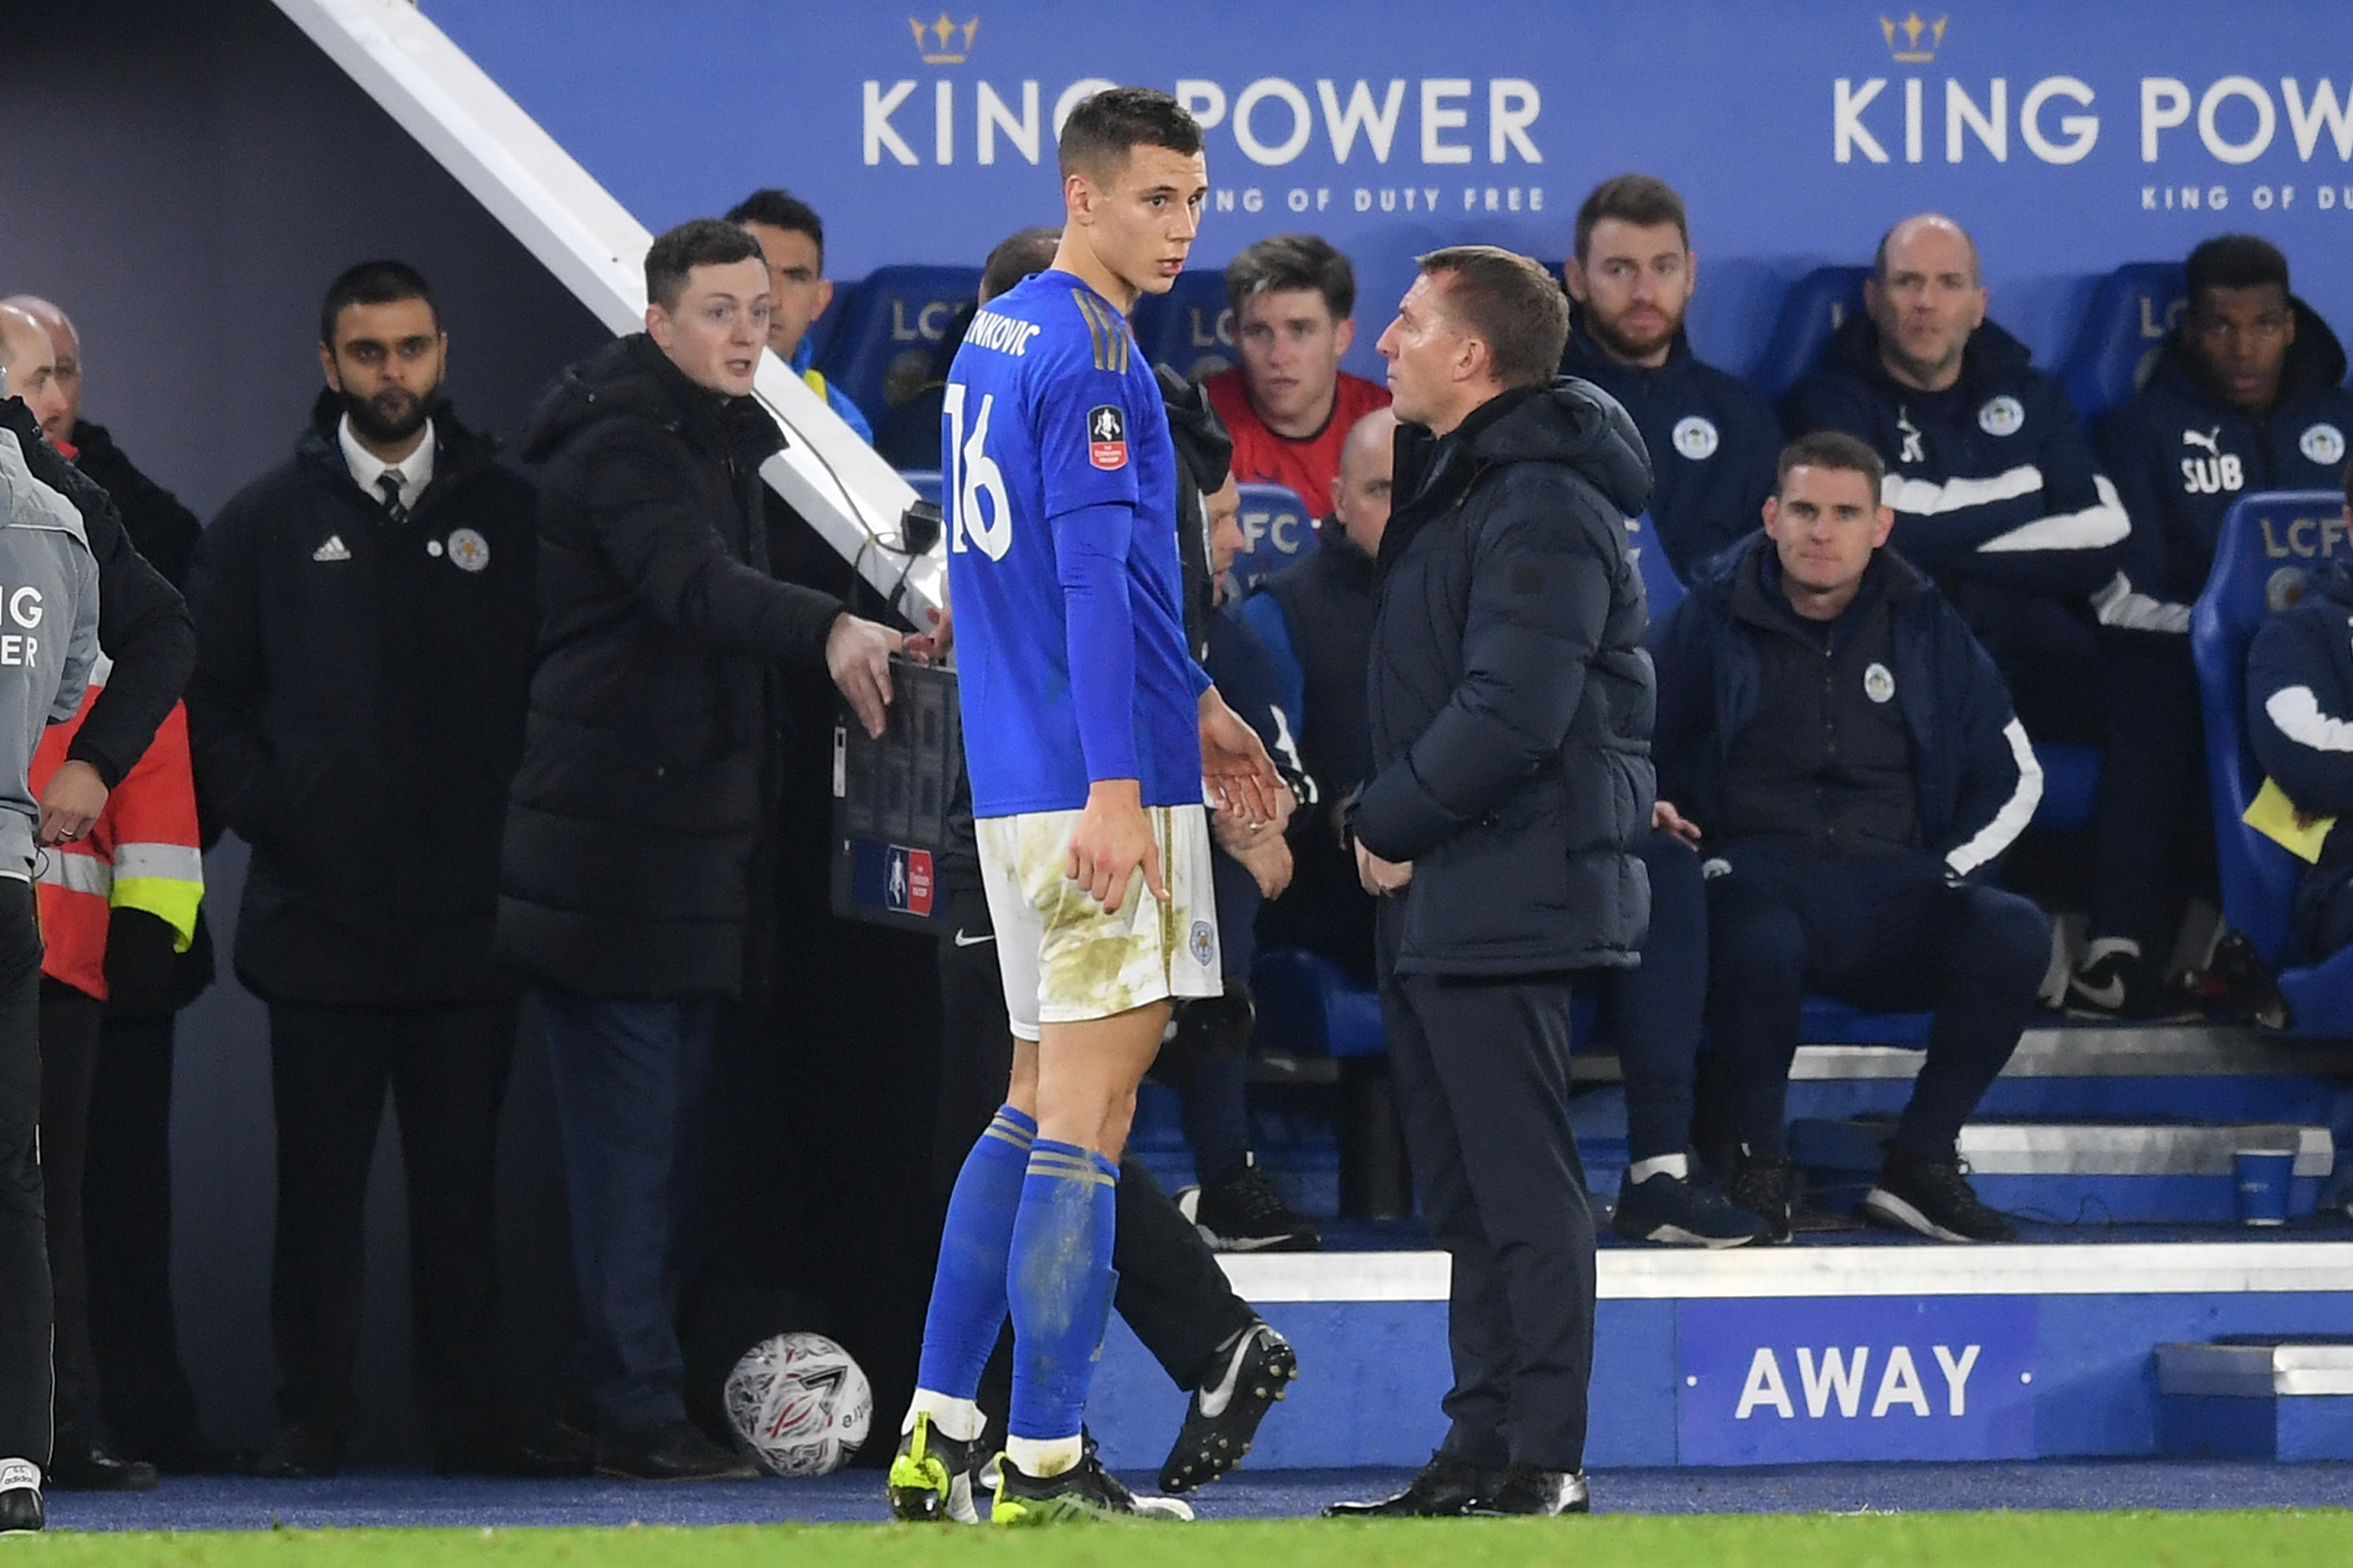 LEICESTER, ENGLAND - JANUARY 04: Filip Benkovic of Leicester City speaks to Brendan Rodgers, Manager of Leicester City as he is substituted off during the FA Cup Third Round match between Leicester City and Wigan Athletic at The King Power Stadium on January 04, 2020 in Leicester, England. (Photo by Michael Regan/Getty Images)